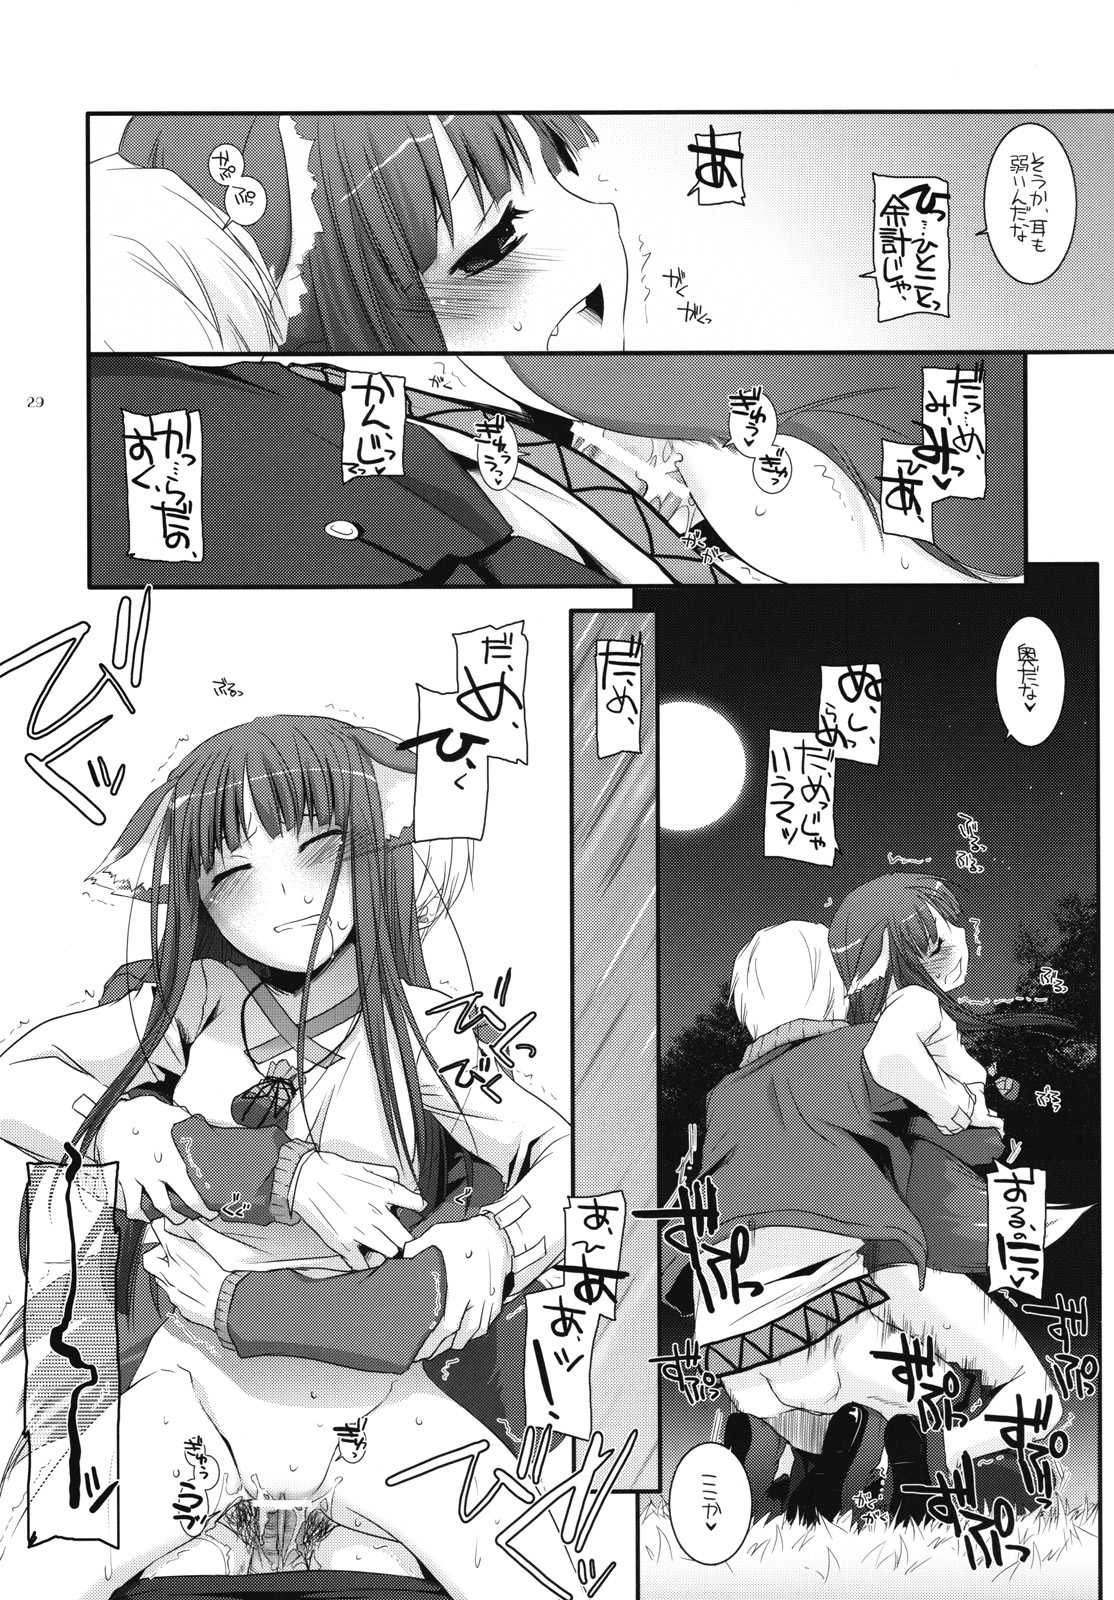 [Digital Lover] D.L.action 43 (Spice and Wolf) 